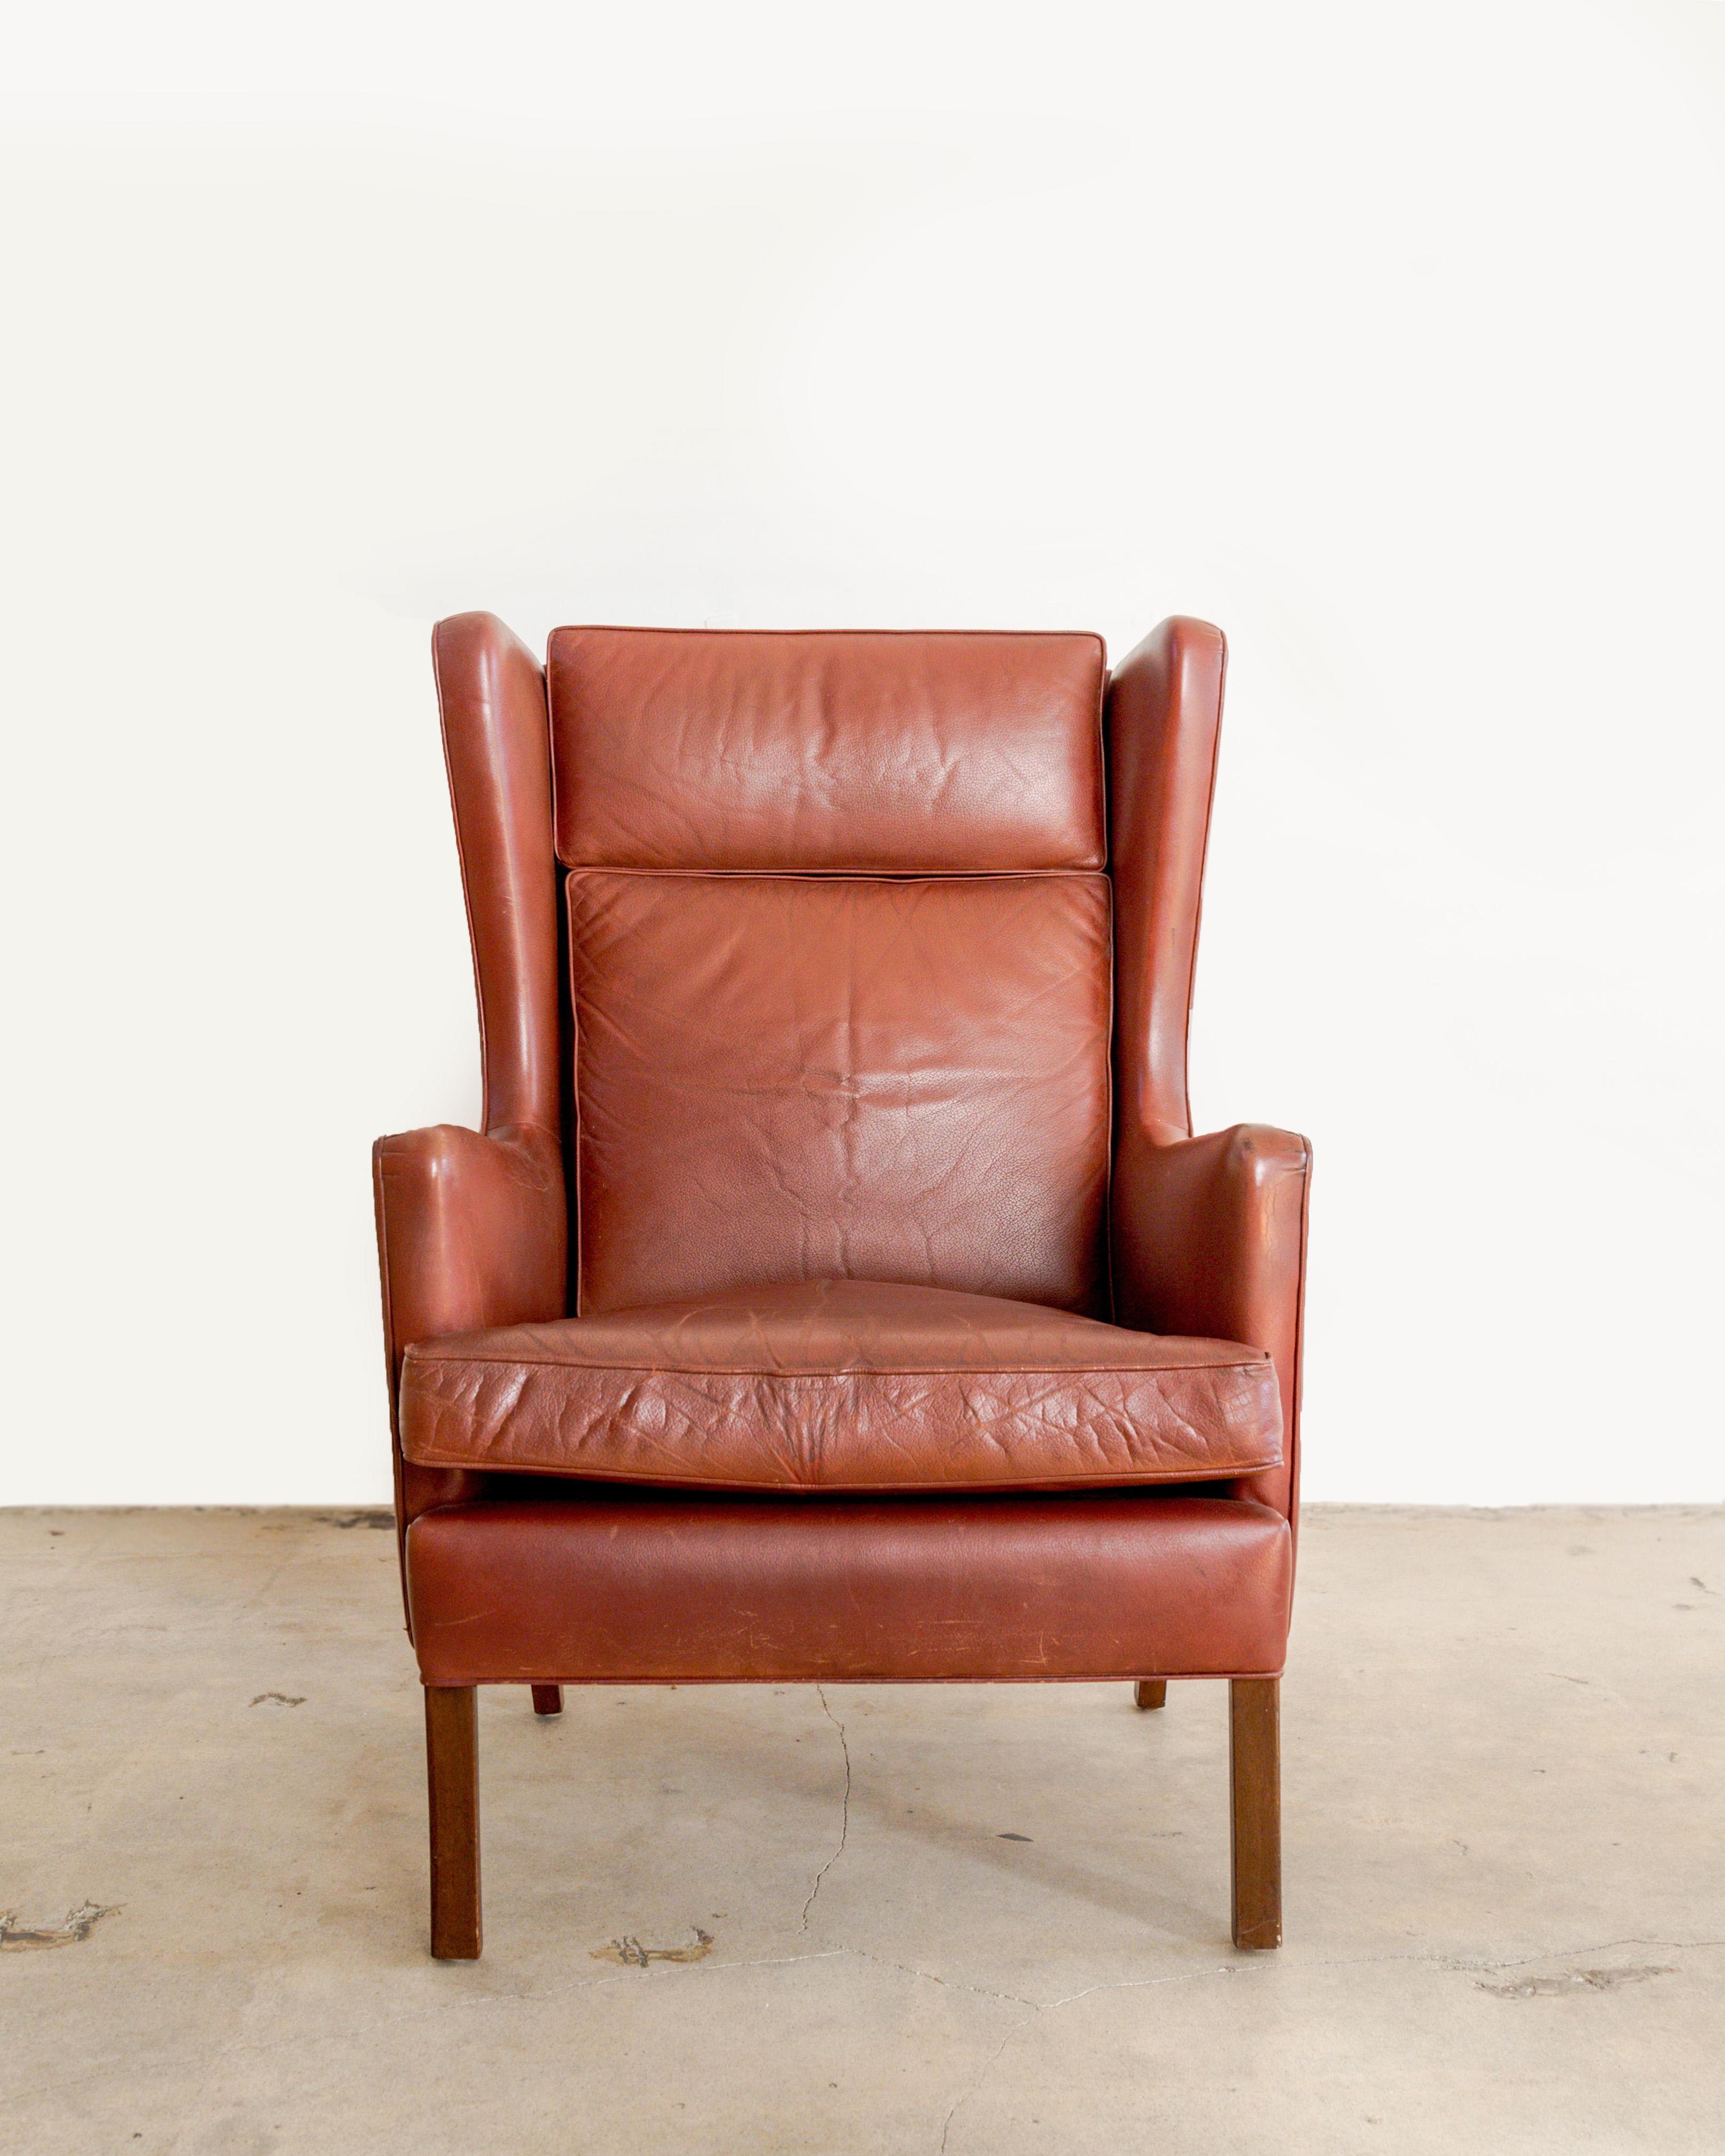 Borge Mogensen wing chair in original oxblood leather with new cushion inserts, Denmark, circa 1960.’s.